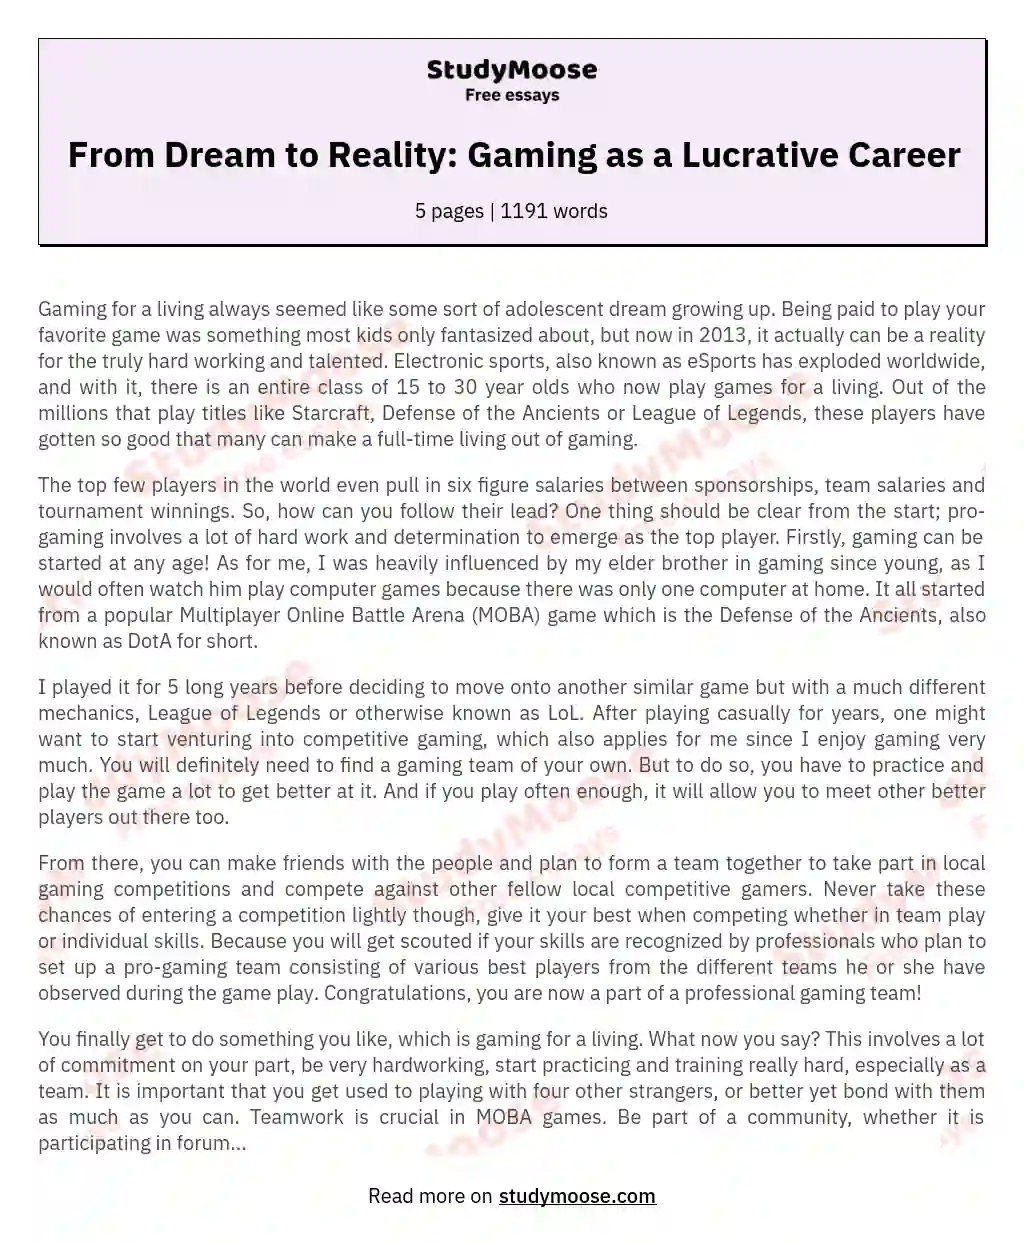 From Dream to Reality: Gaming as a Lucrative Career essay